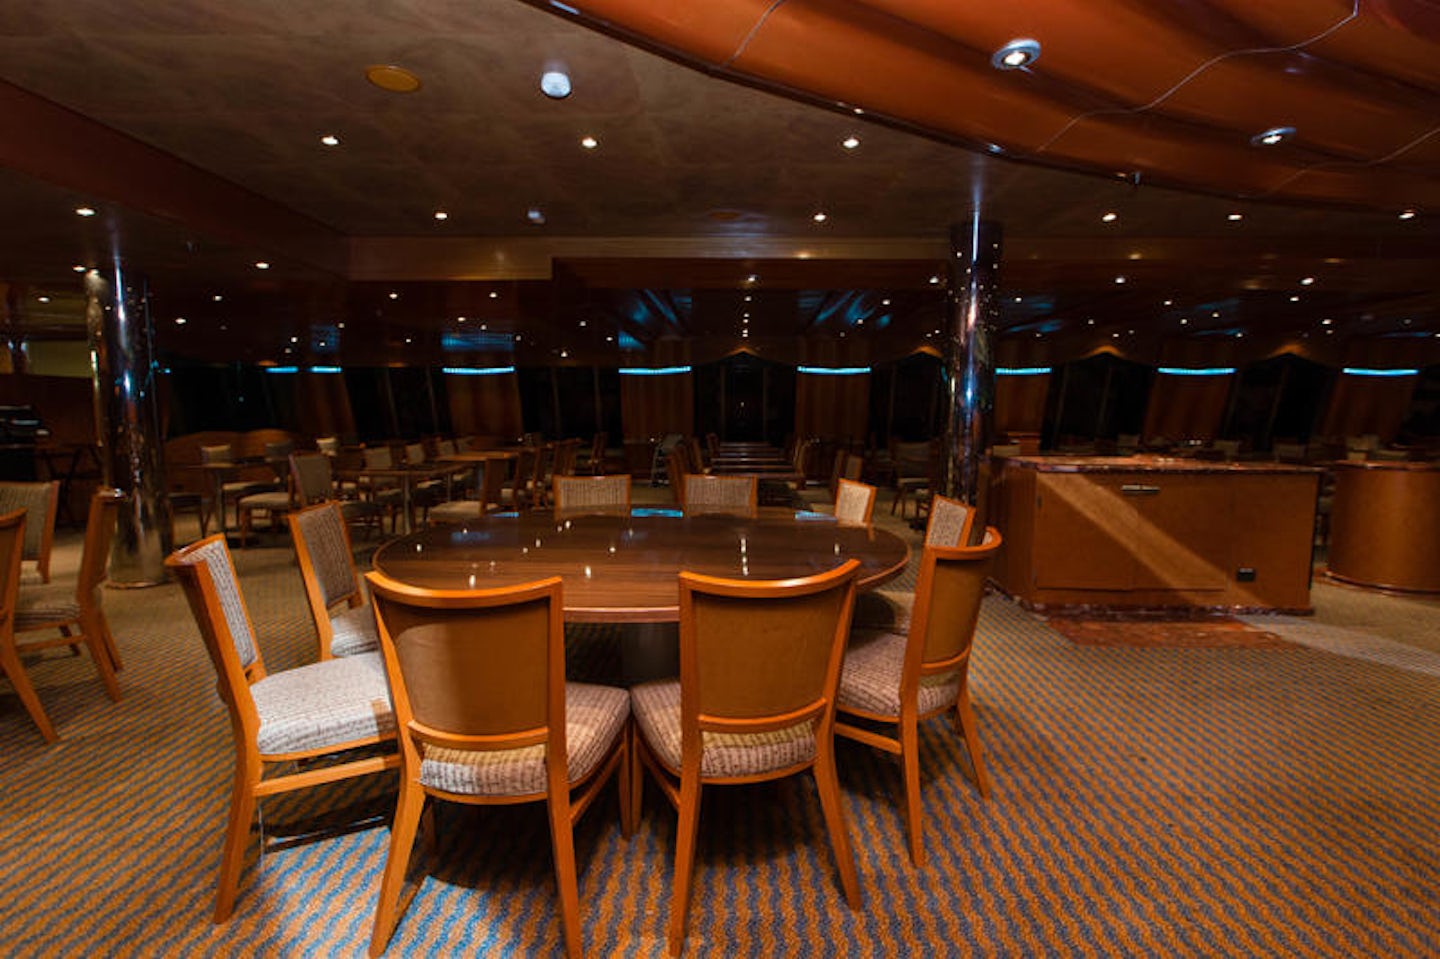 Northern Lights Dining Room on Carnival Magic